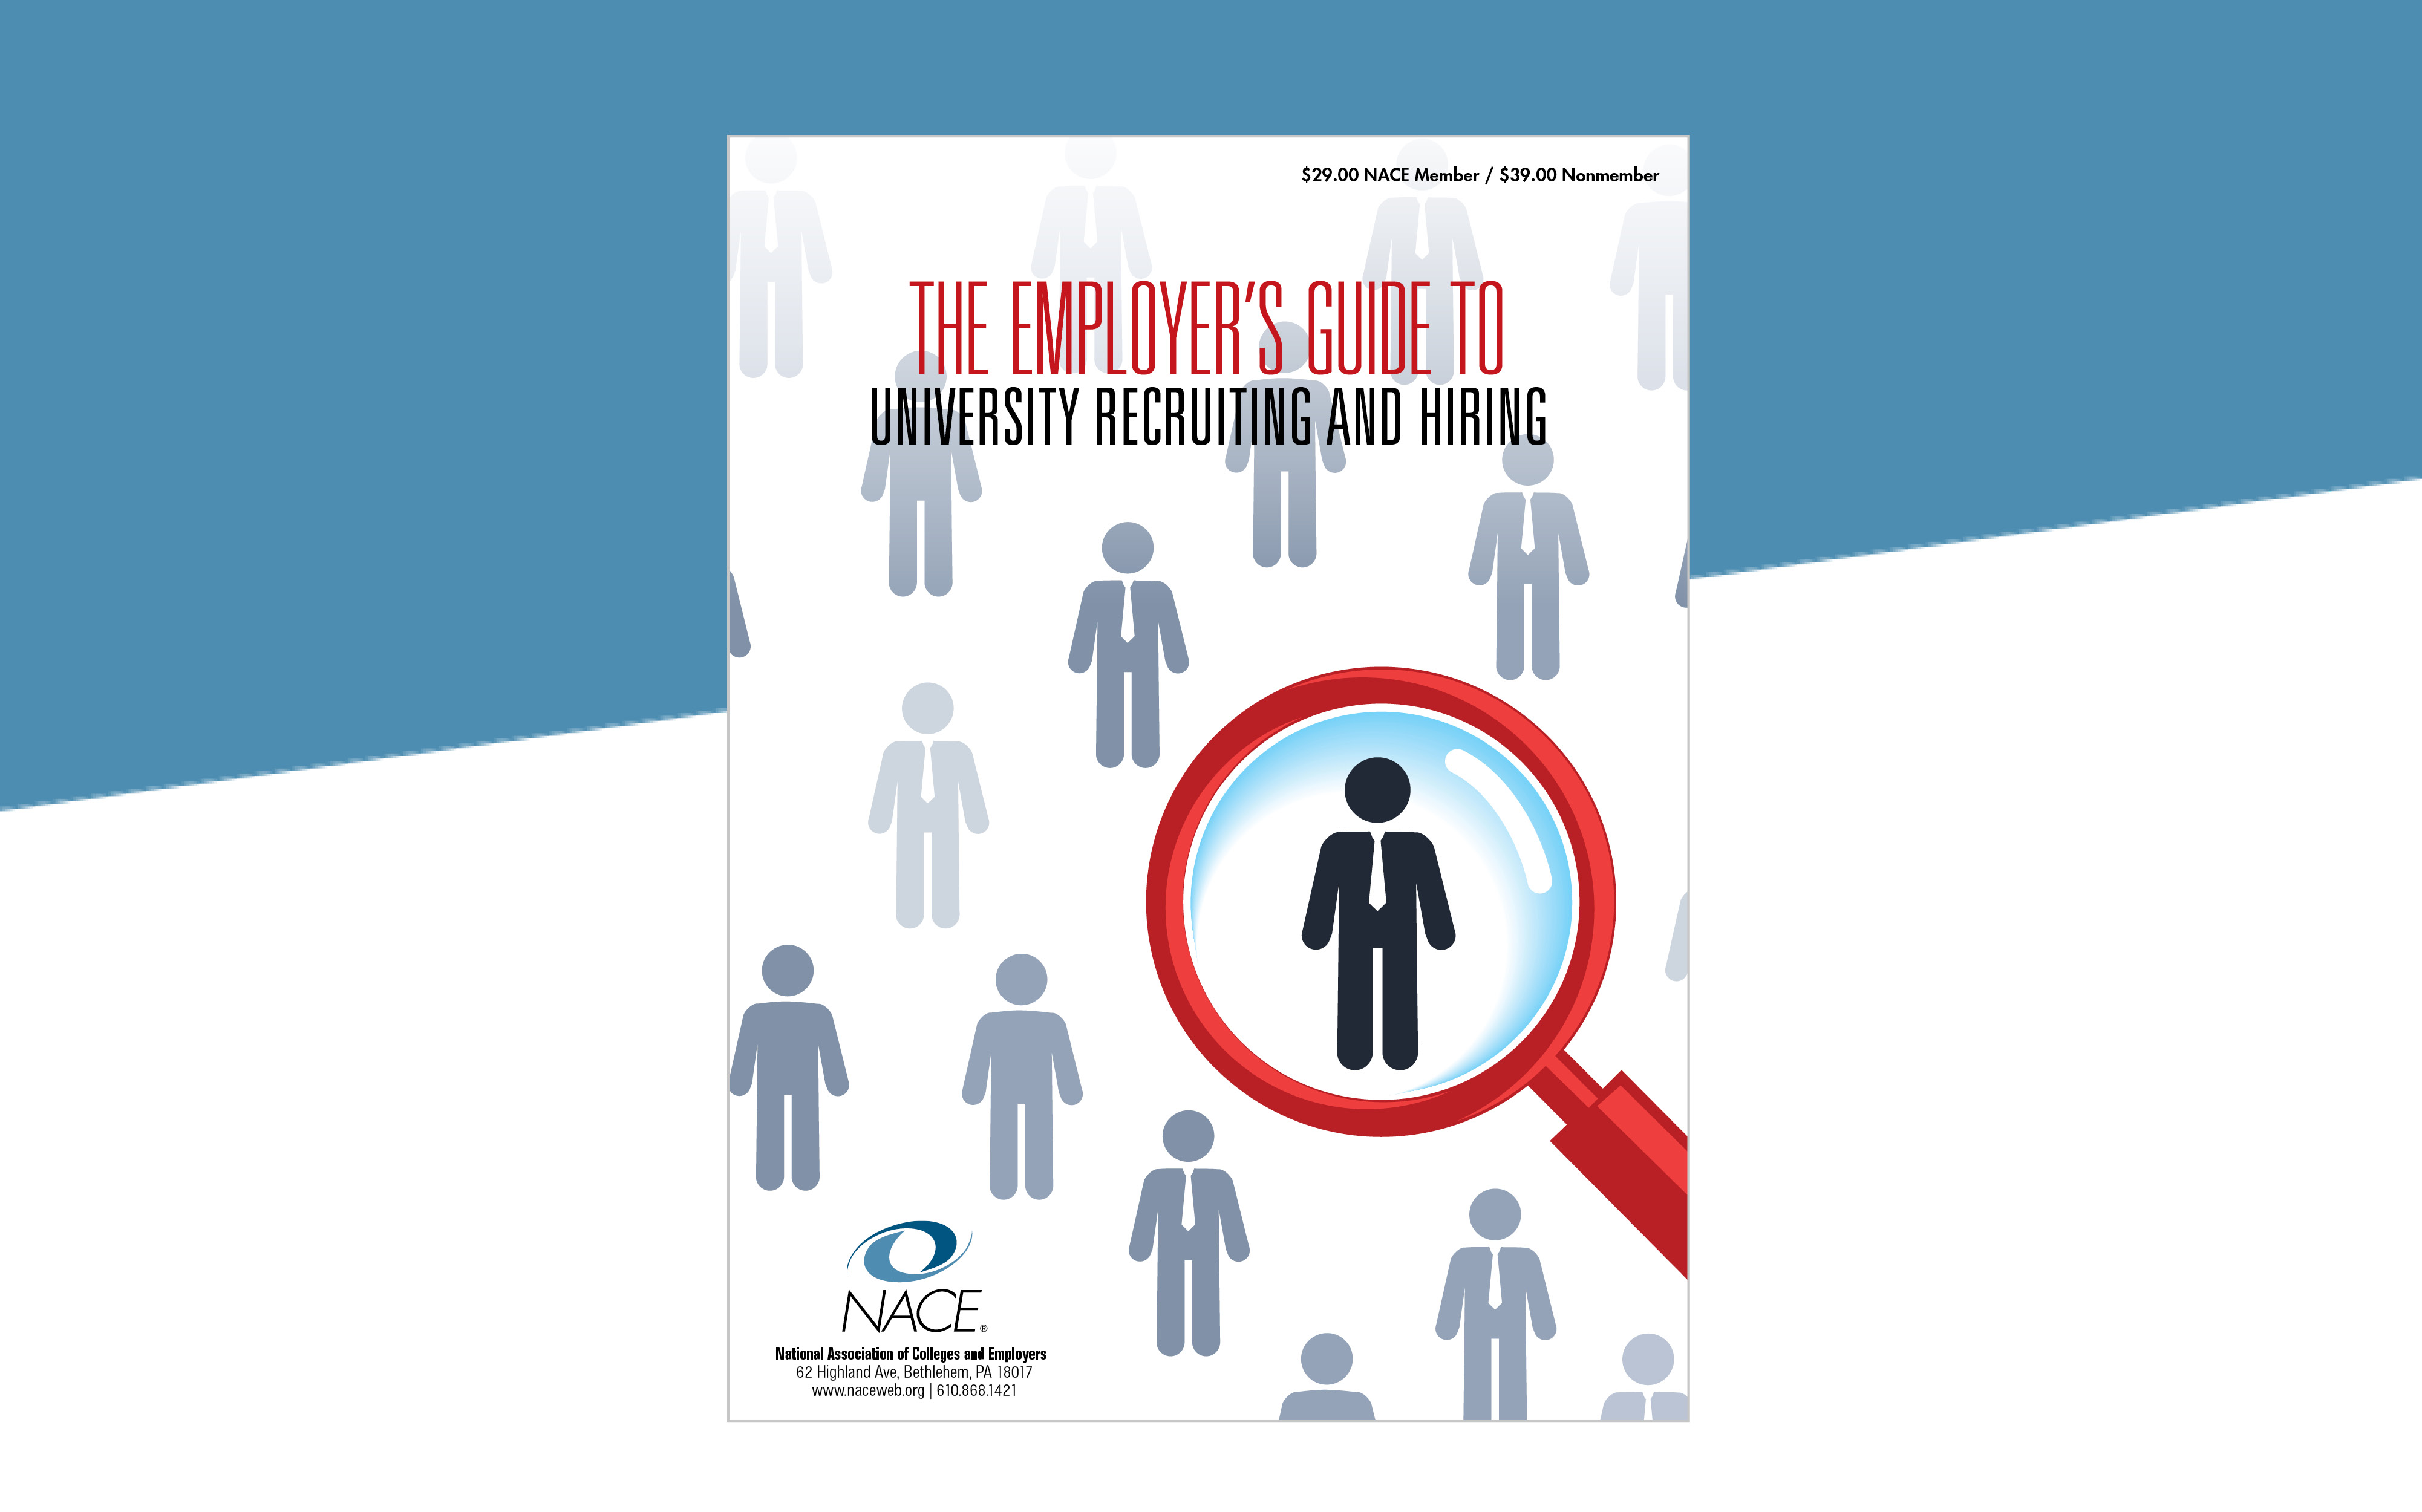 The Employer’s Guide to University Recruiting & Hiring